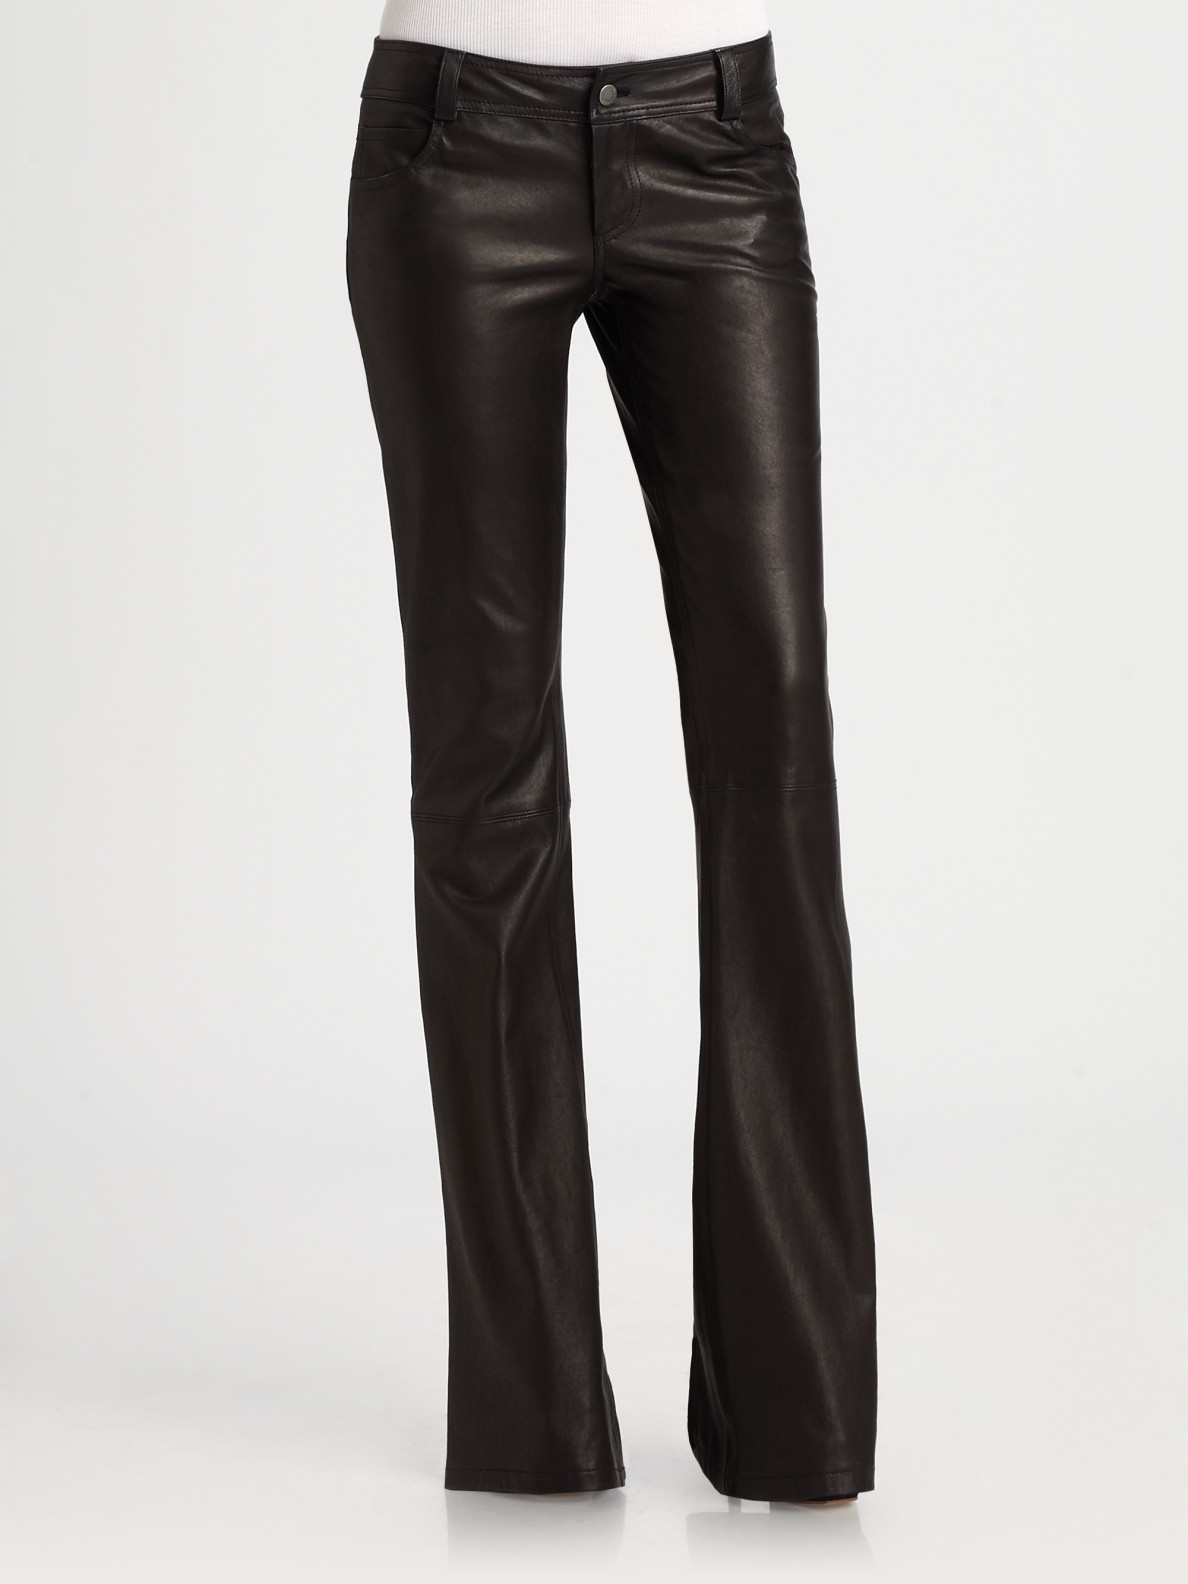 Alice + Olivia Leather Bell Pants in Black - Lyst